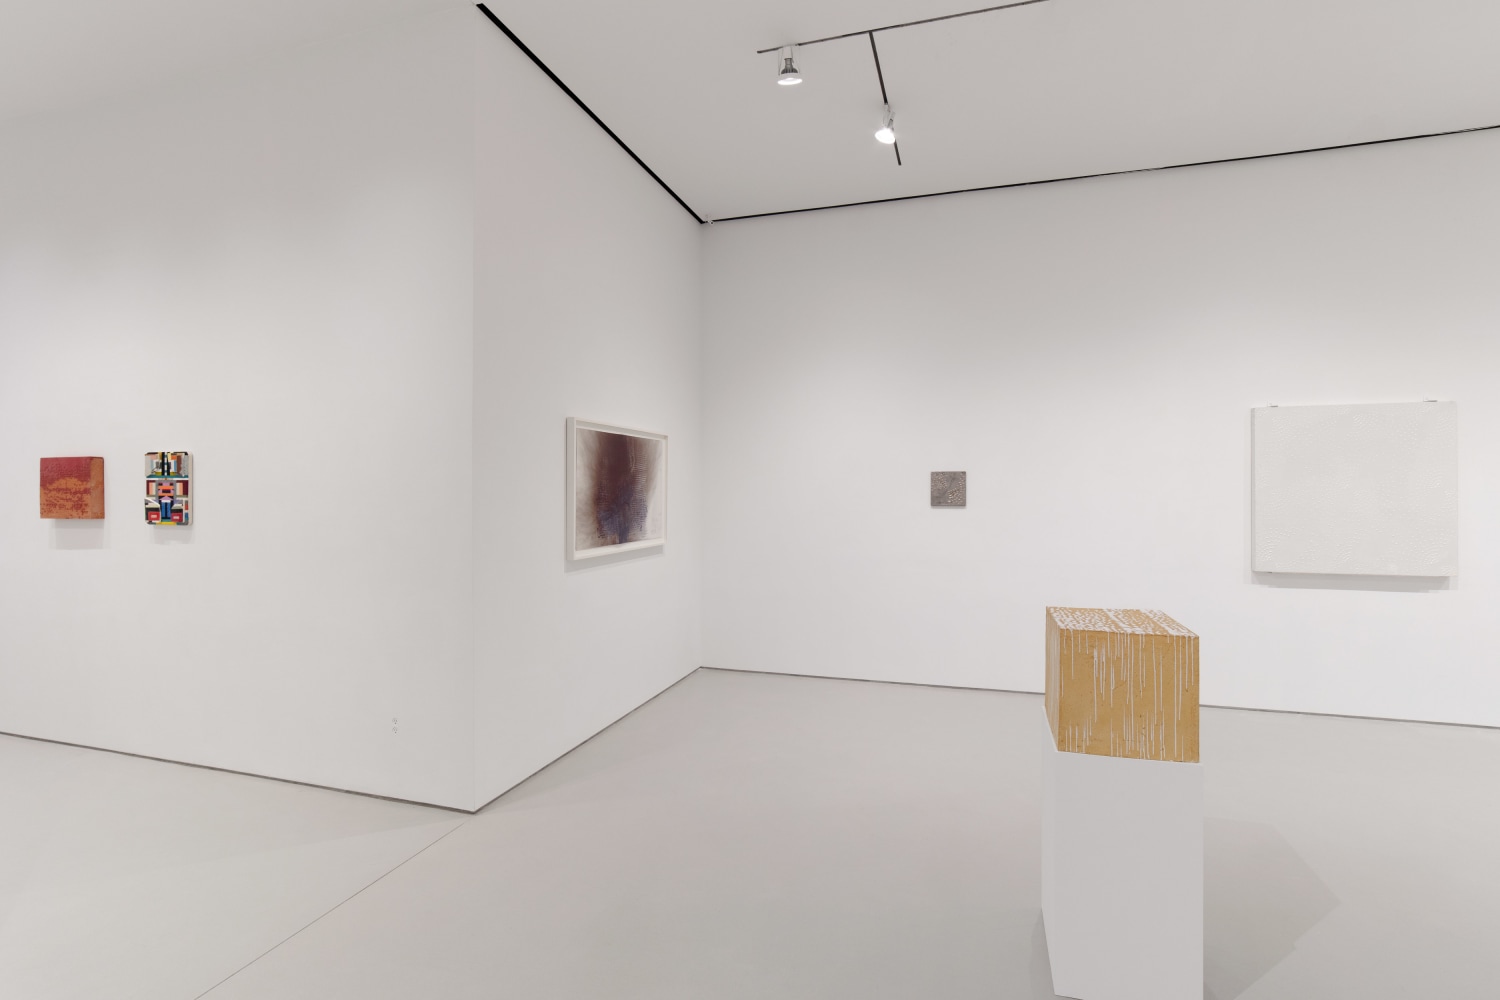 A view of the gallery with works by Otto Piene and Kevin Umaña on display.